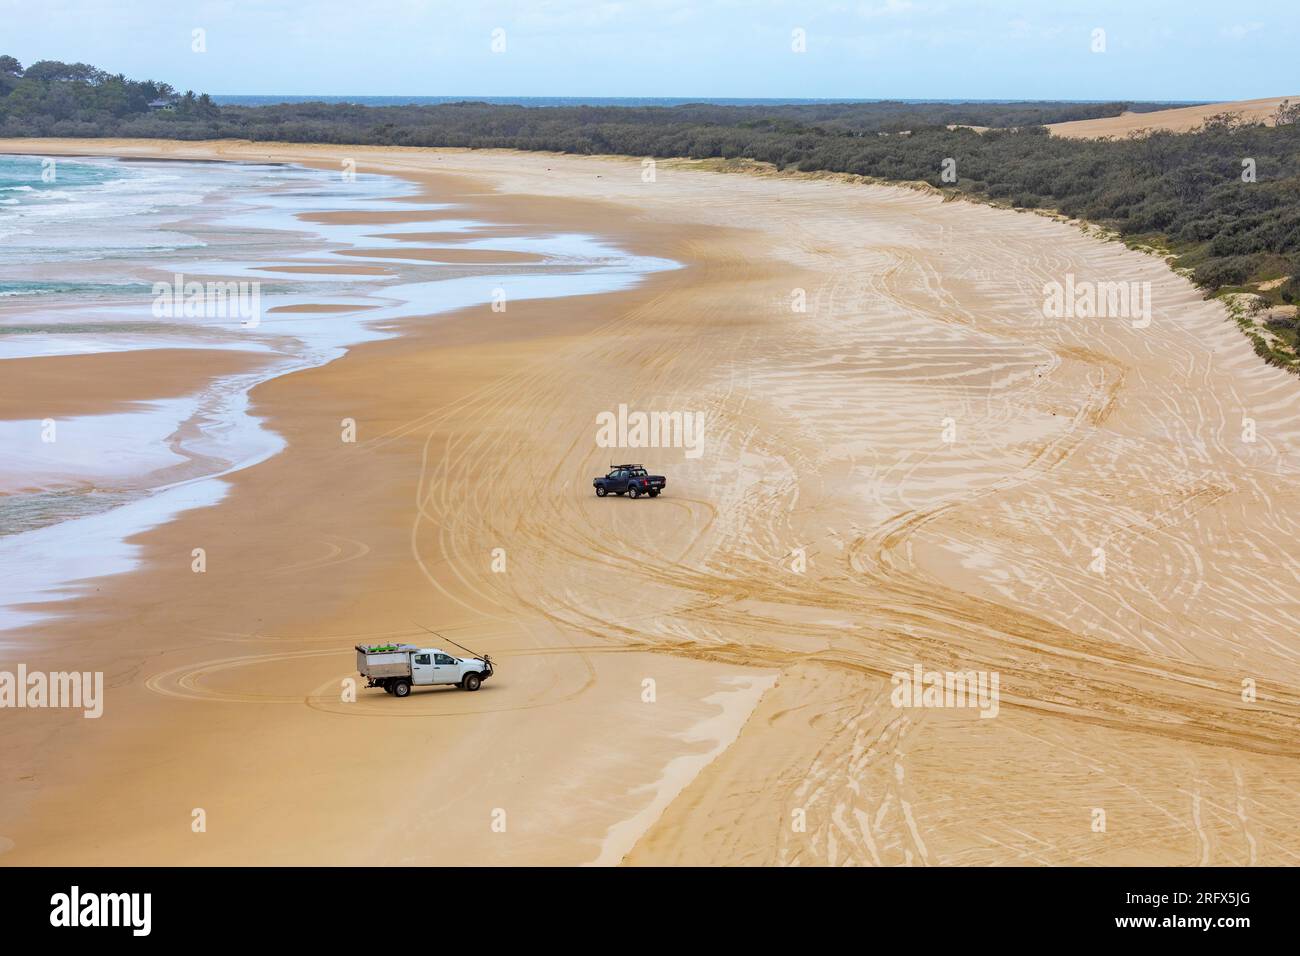 Fraser Island K'gari 75 mile beach sand road and 4WD vehicle driving on the sand,Queensland,Australia Stock Photo